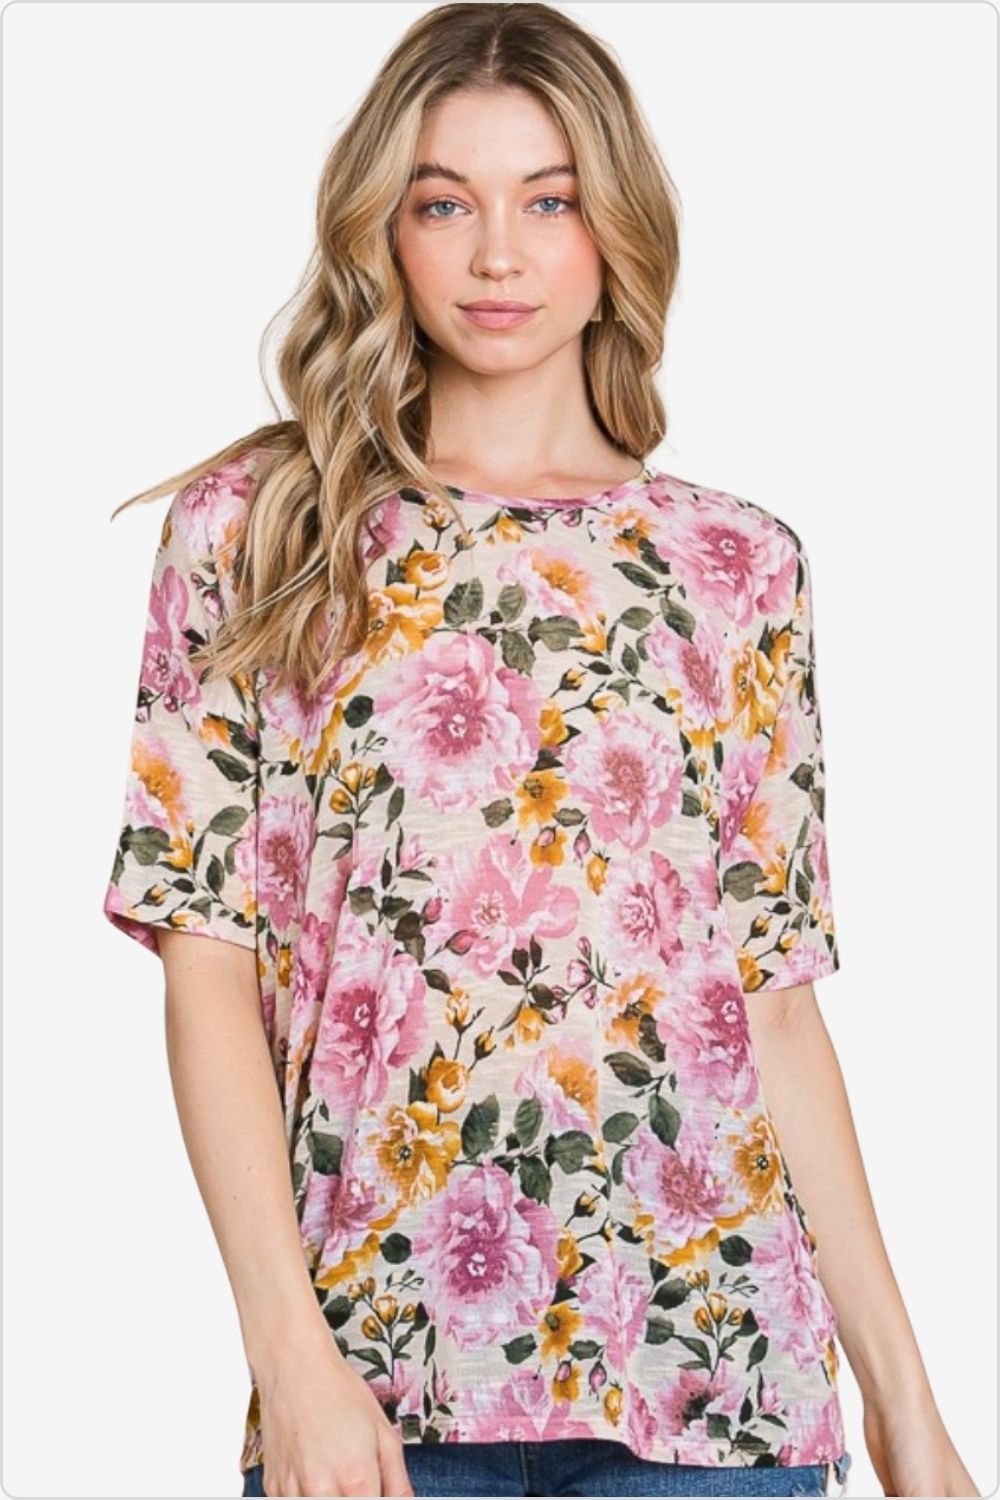 Stylish woman wearing a floral round neck t-shirt, perfect for casual or dressy occasions, Color Sand